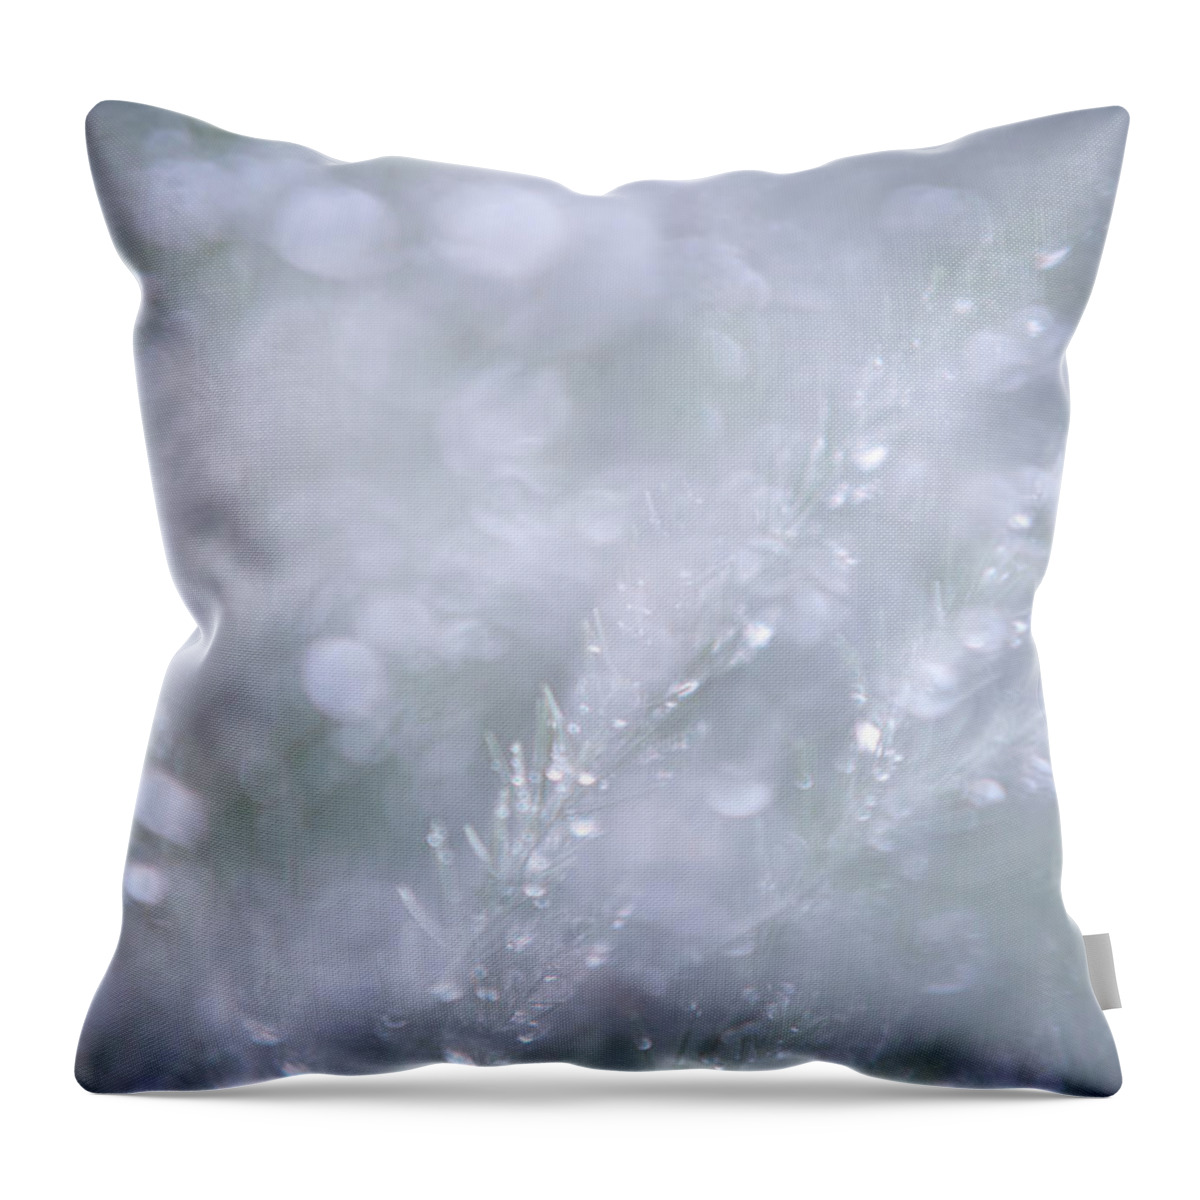 Jenny Rainbow Fine Art Photography Throw Pillow featuring the photograph Dazzling Silver World by Jenny Rainbow